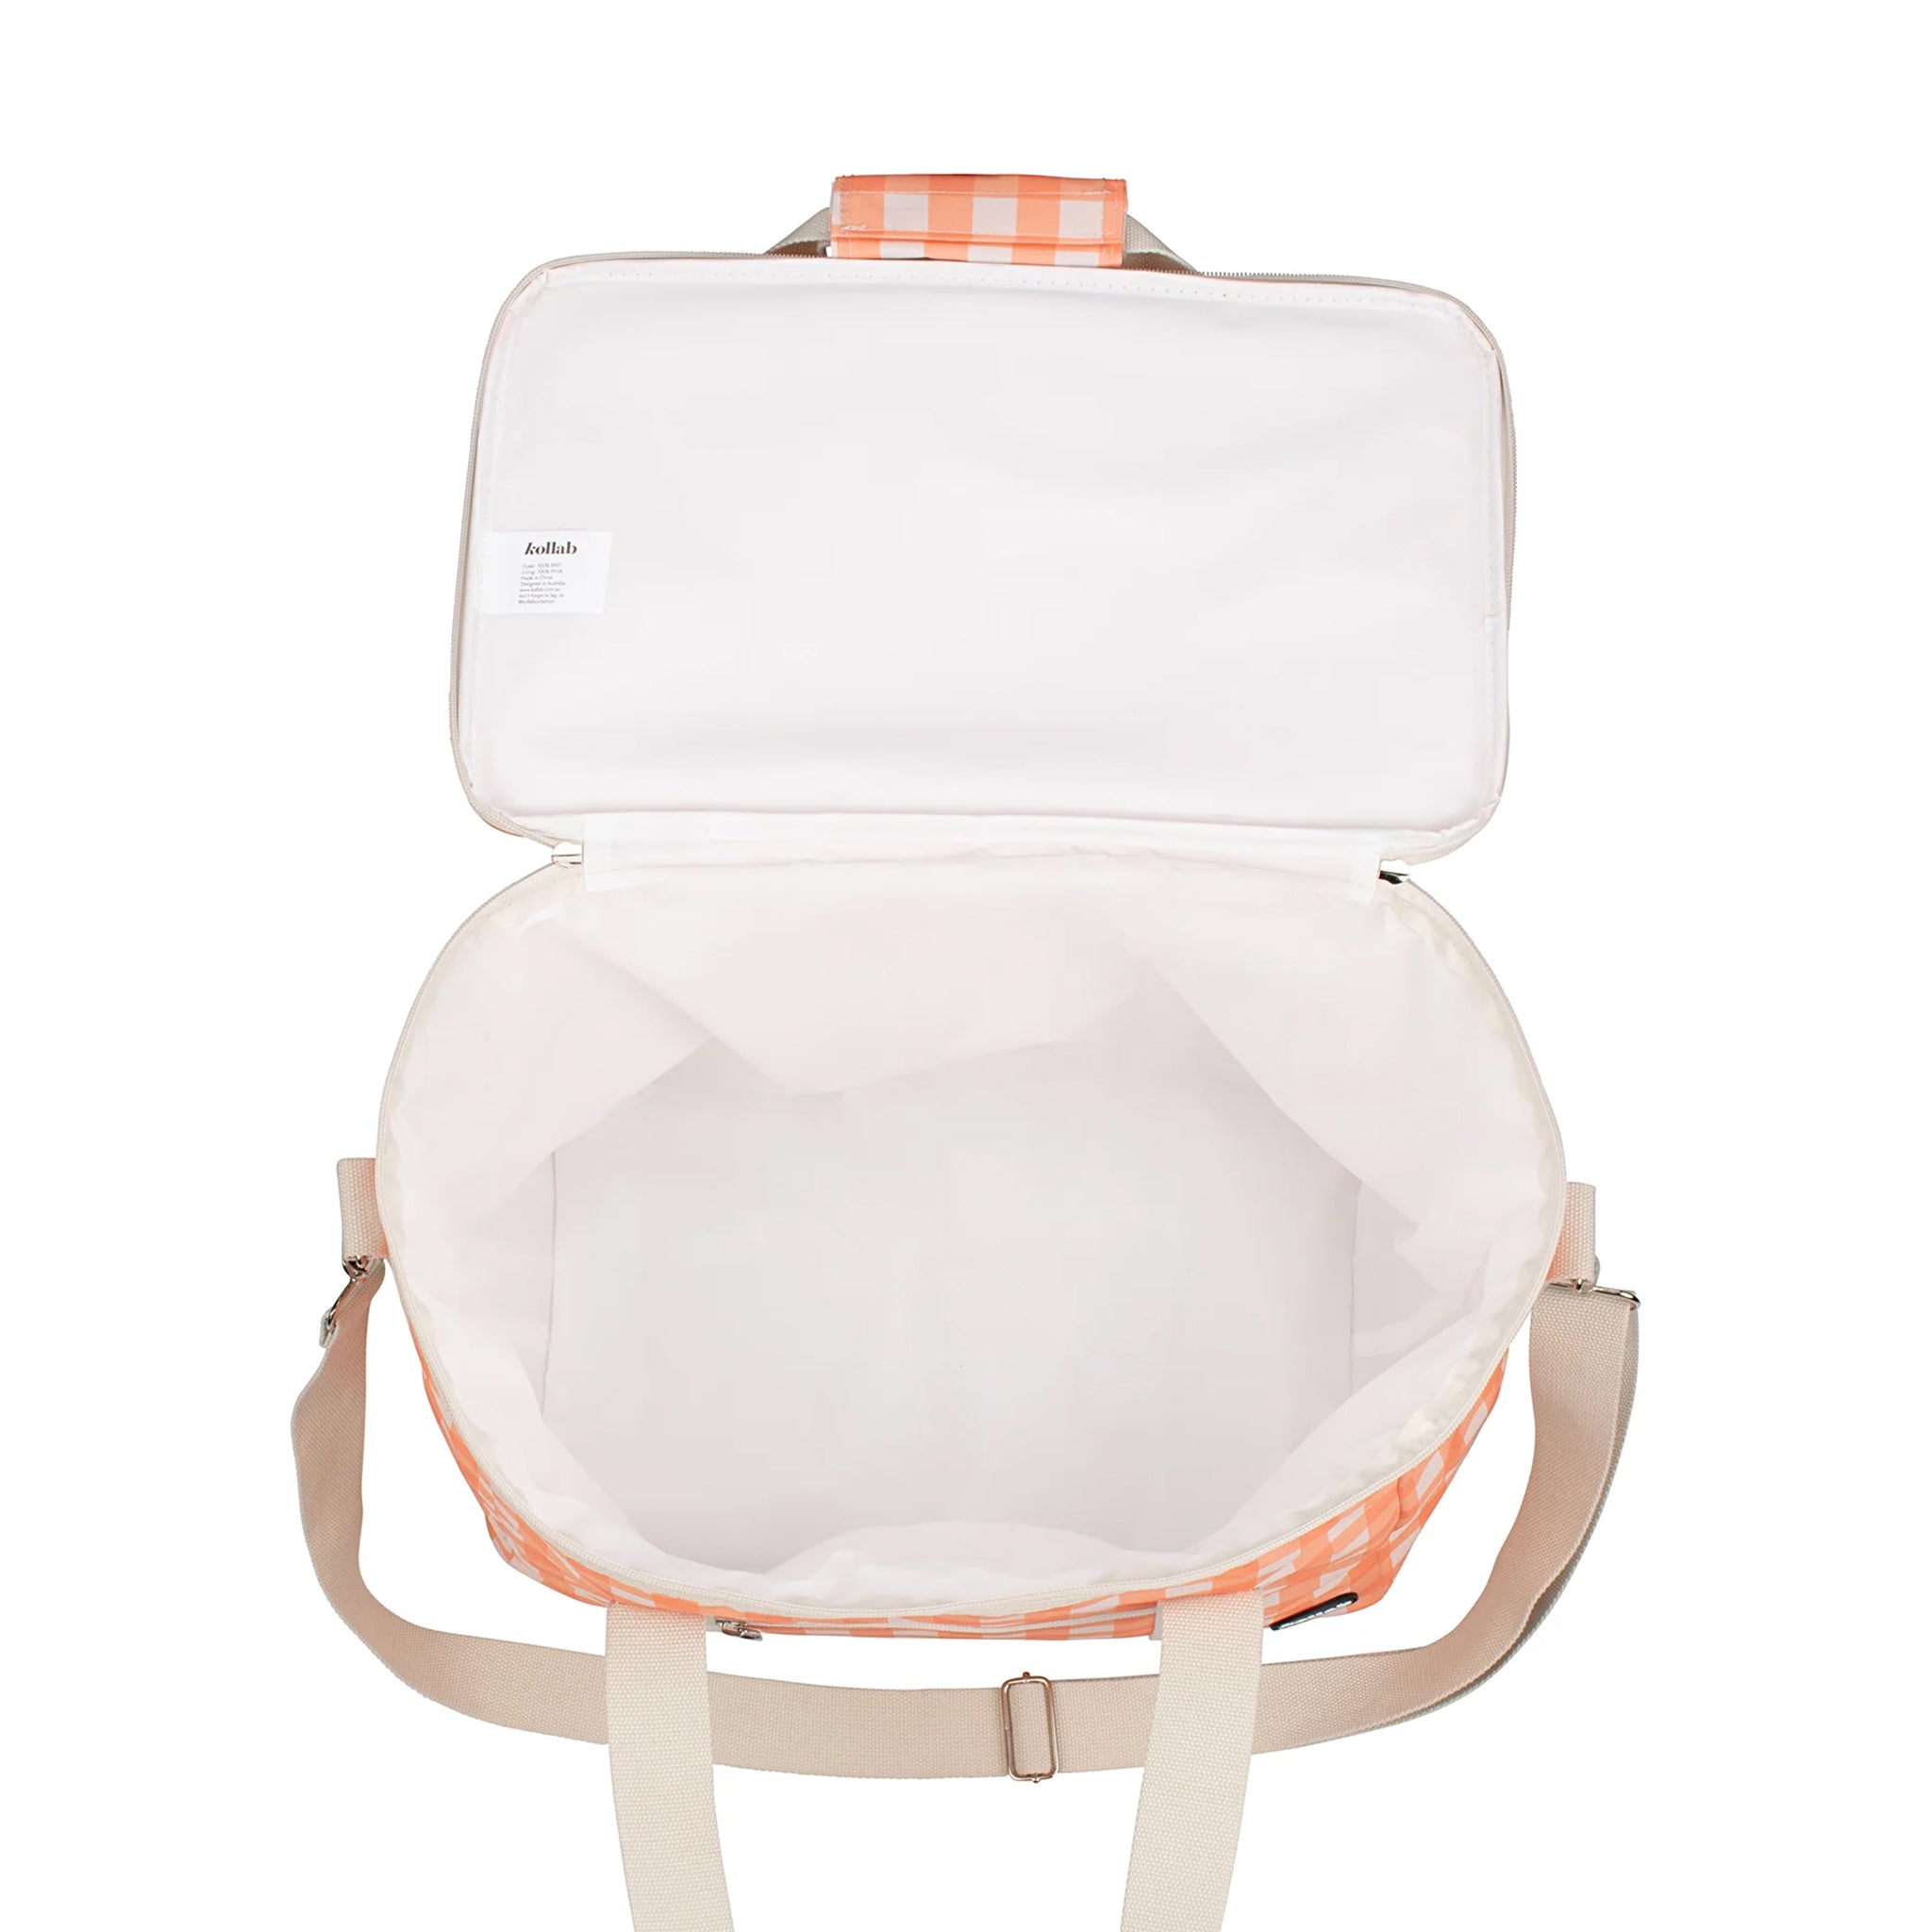 An ivory and apricot checkered print picnic bag with white straps and zippers.